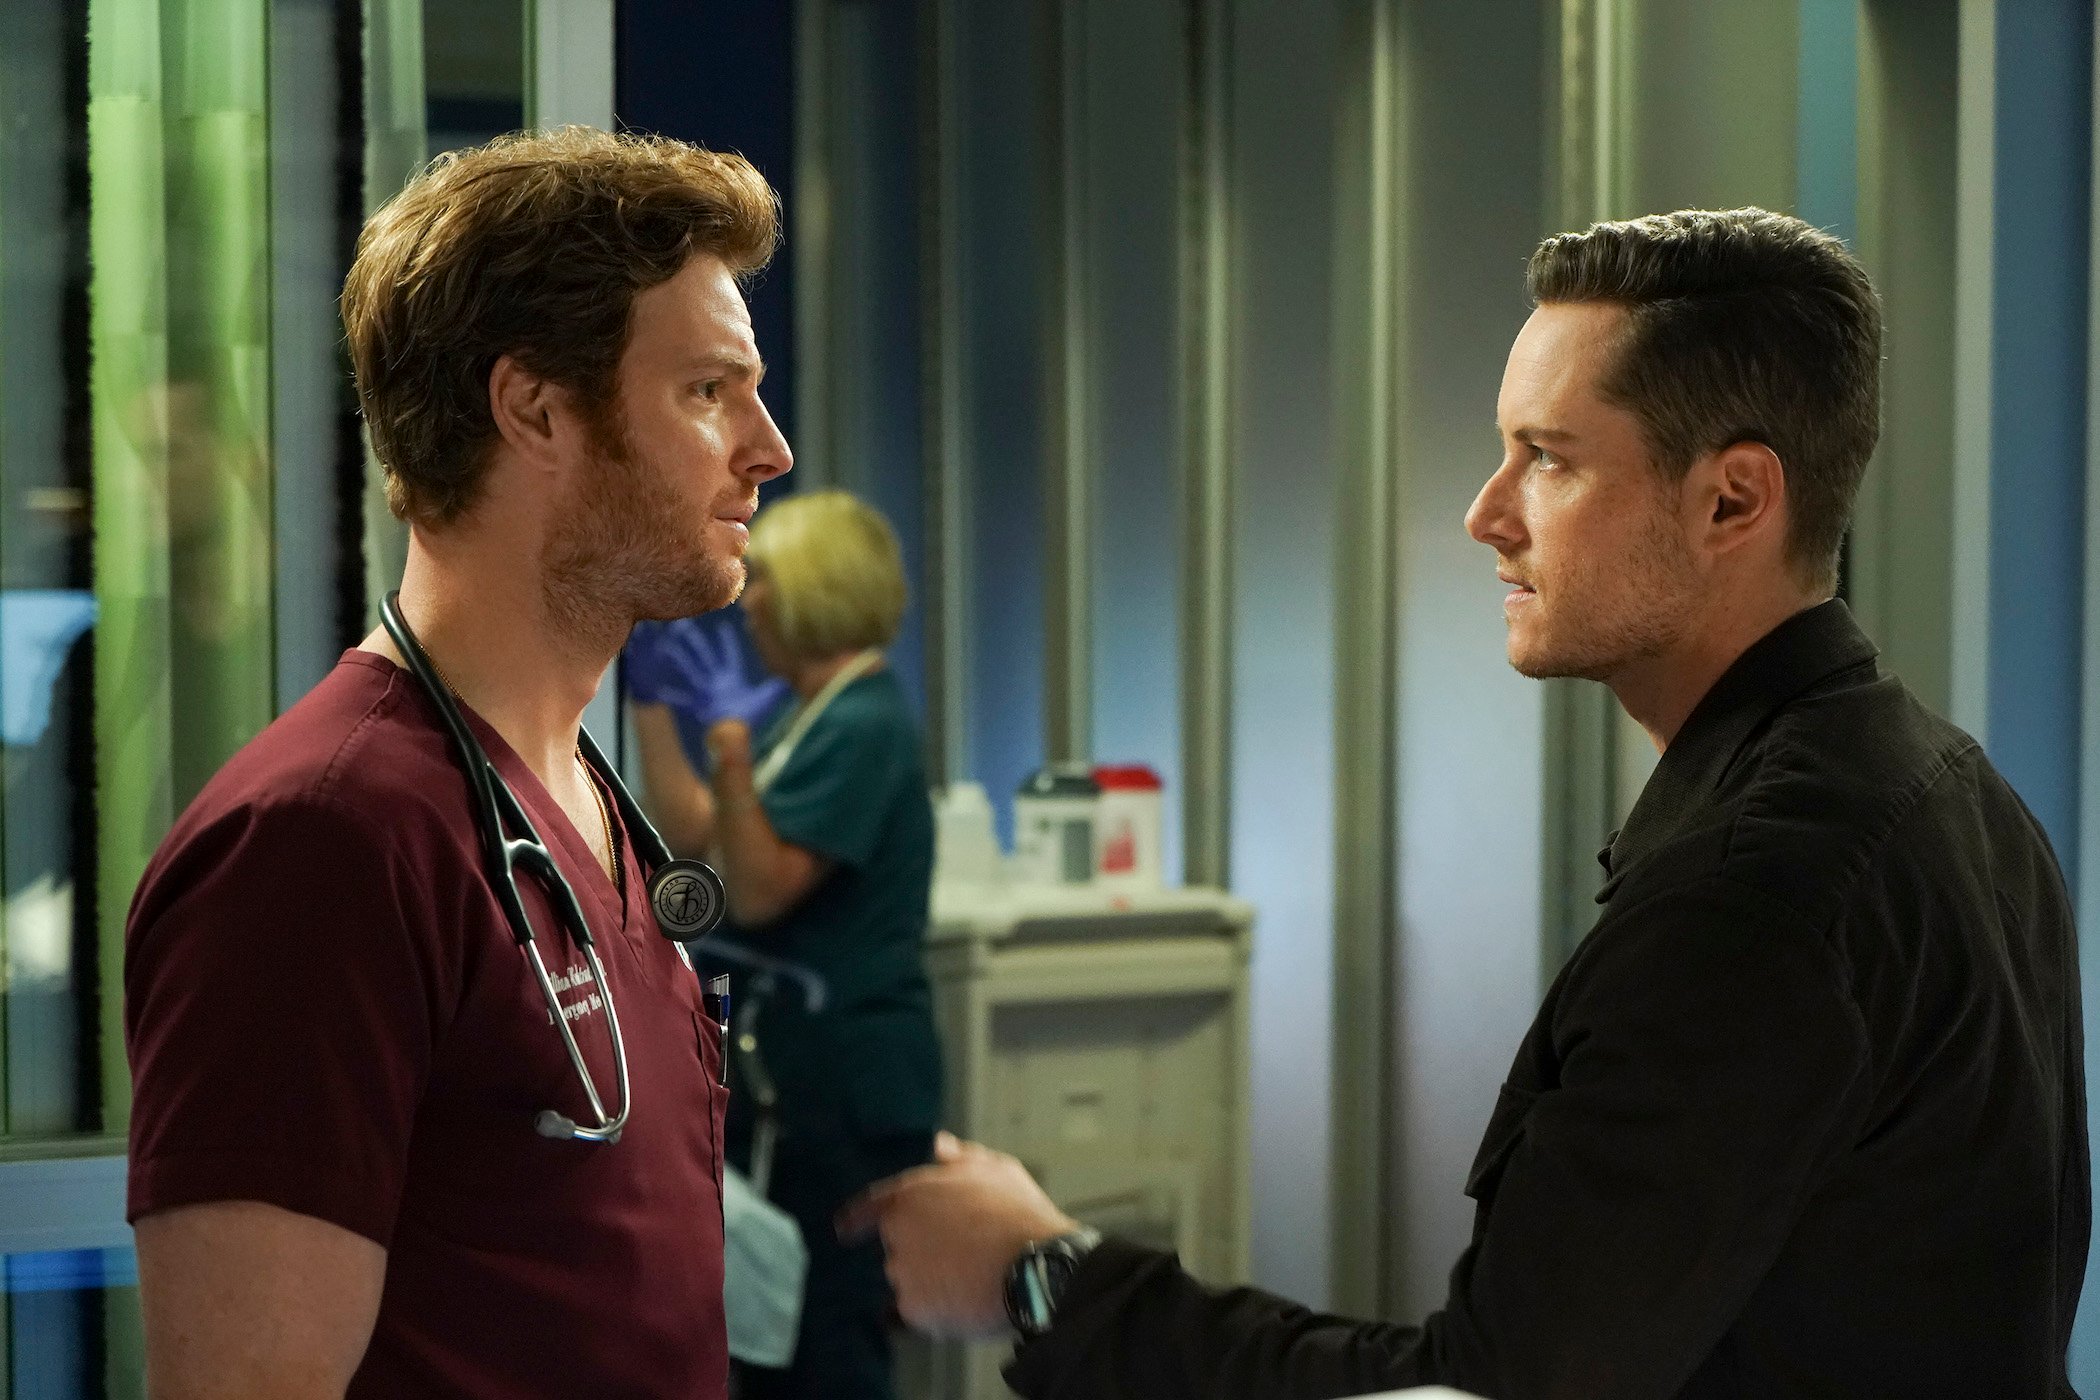 Nick Gehlfuss as Will Halstead in 'Chicago Med' Season 7 and Jesse Lee Soffer as Jay Halstead in 'Chicago P.D.' Season 9 speaking to each other in a hospital